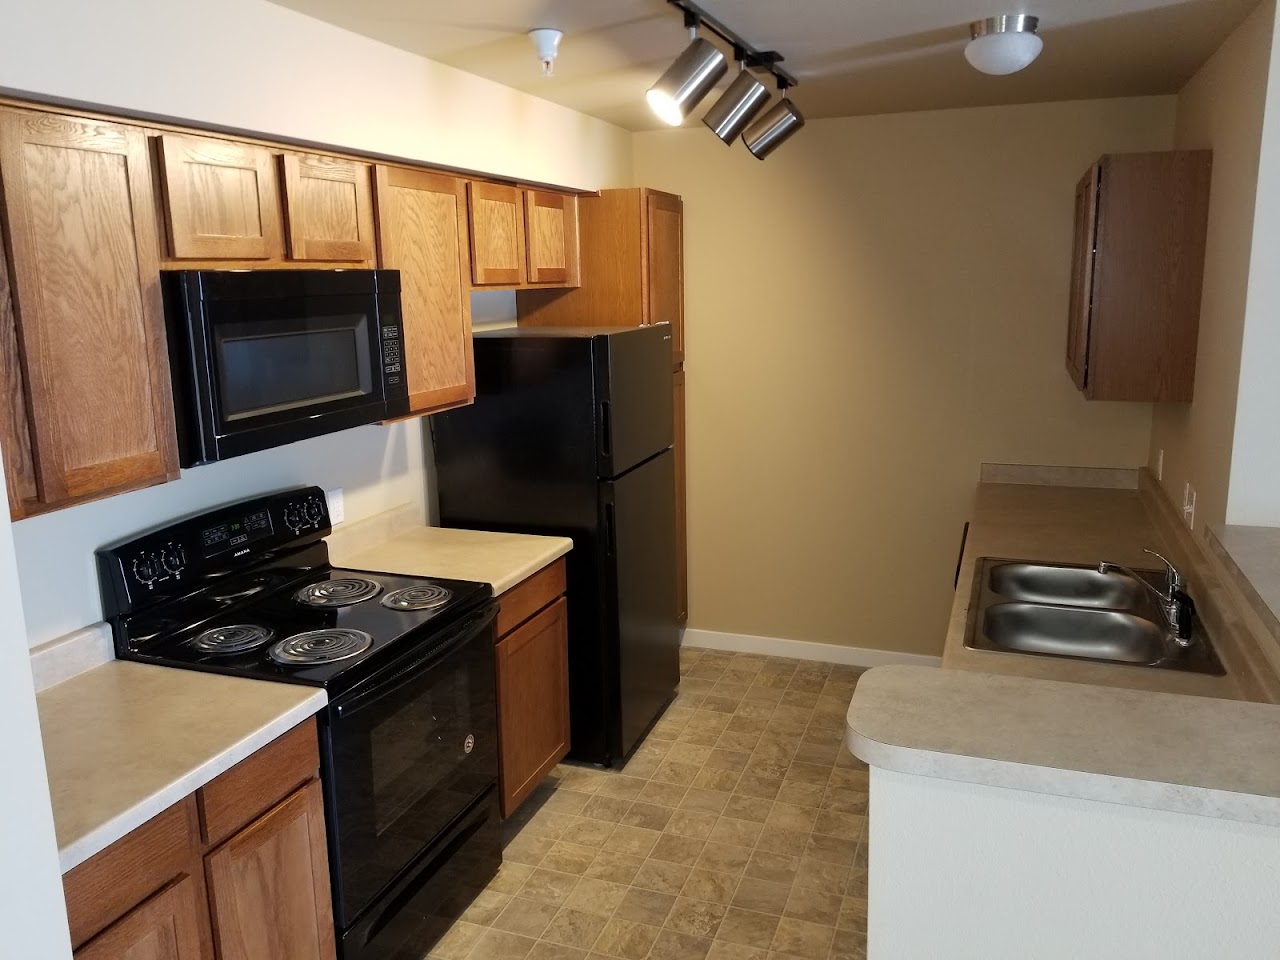 Photo of TULLAMORE COMMONS II. Affordable housing located at 3677 DONEGAL LANE POST FALLS, ID 83854